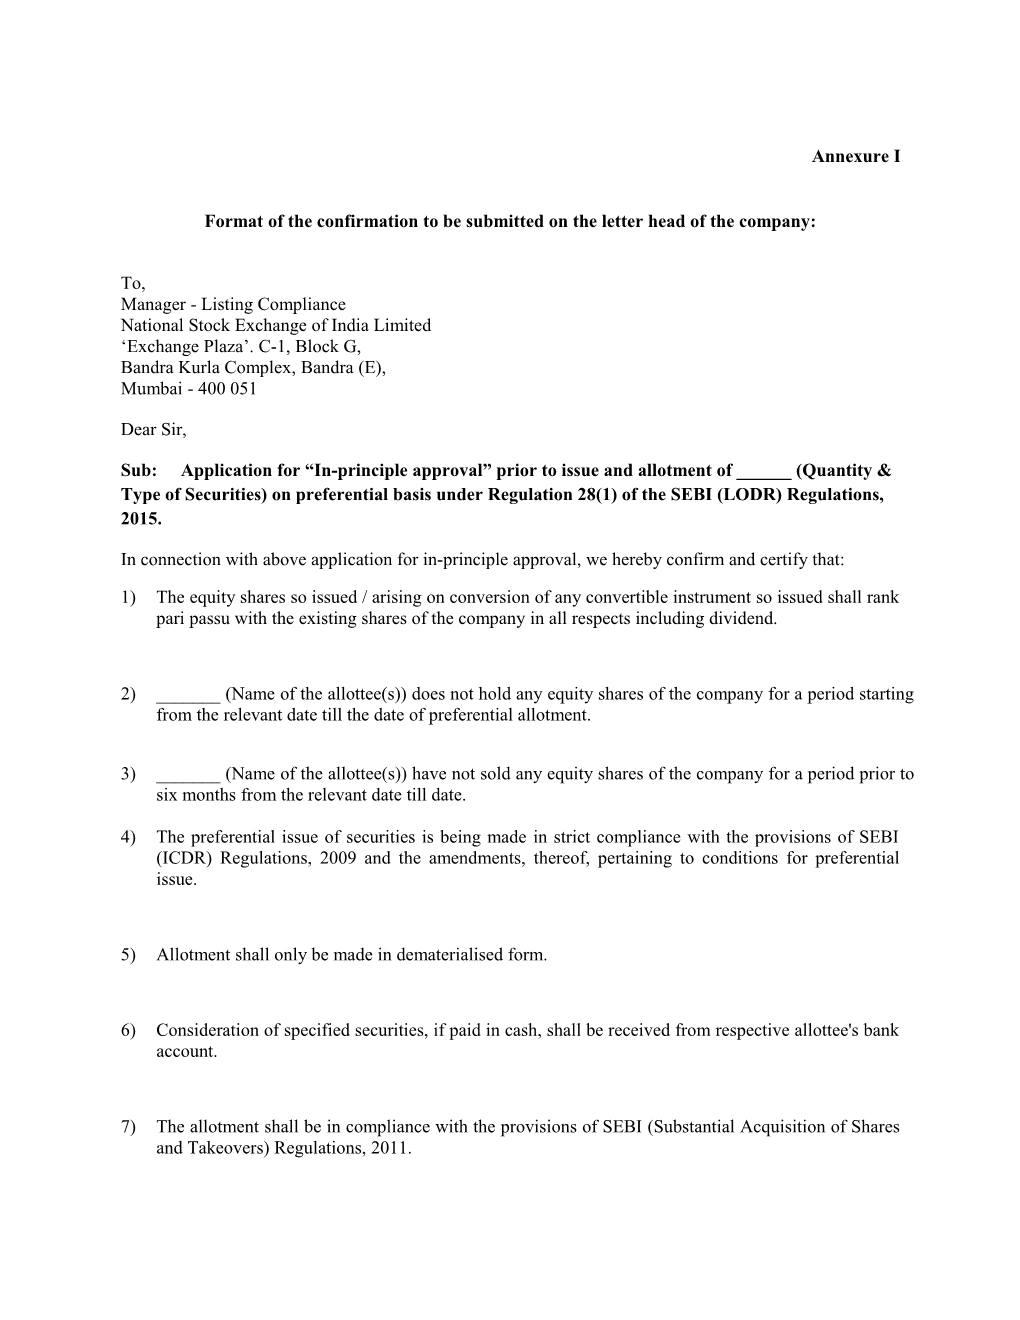 Format of the Confirmation to Be Submitted on the Letter Head of the Company